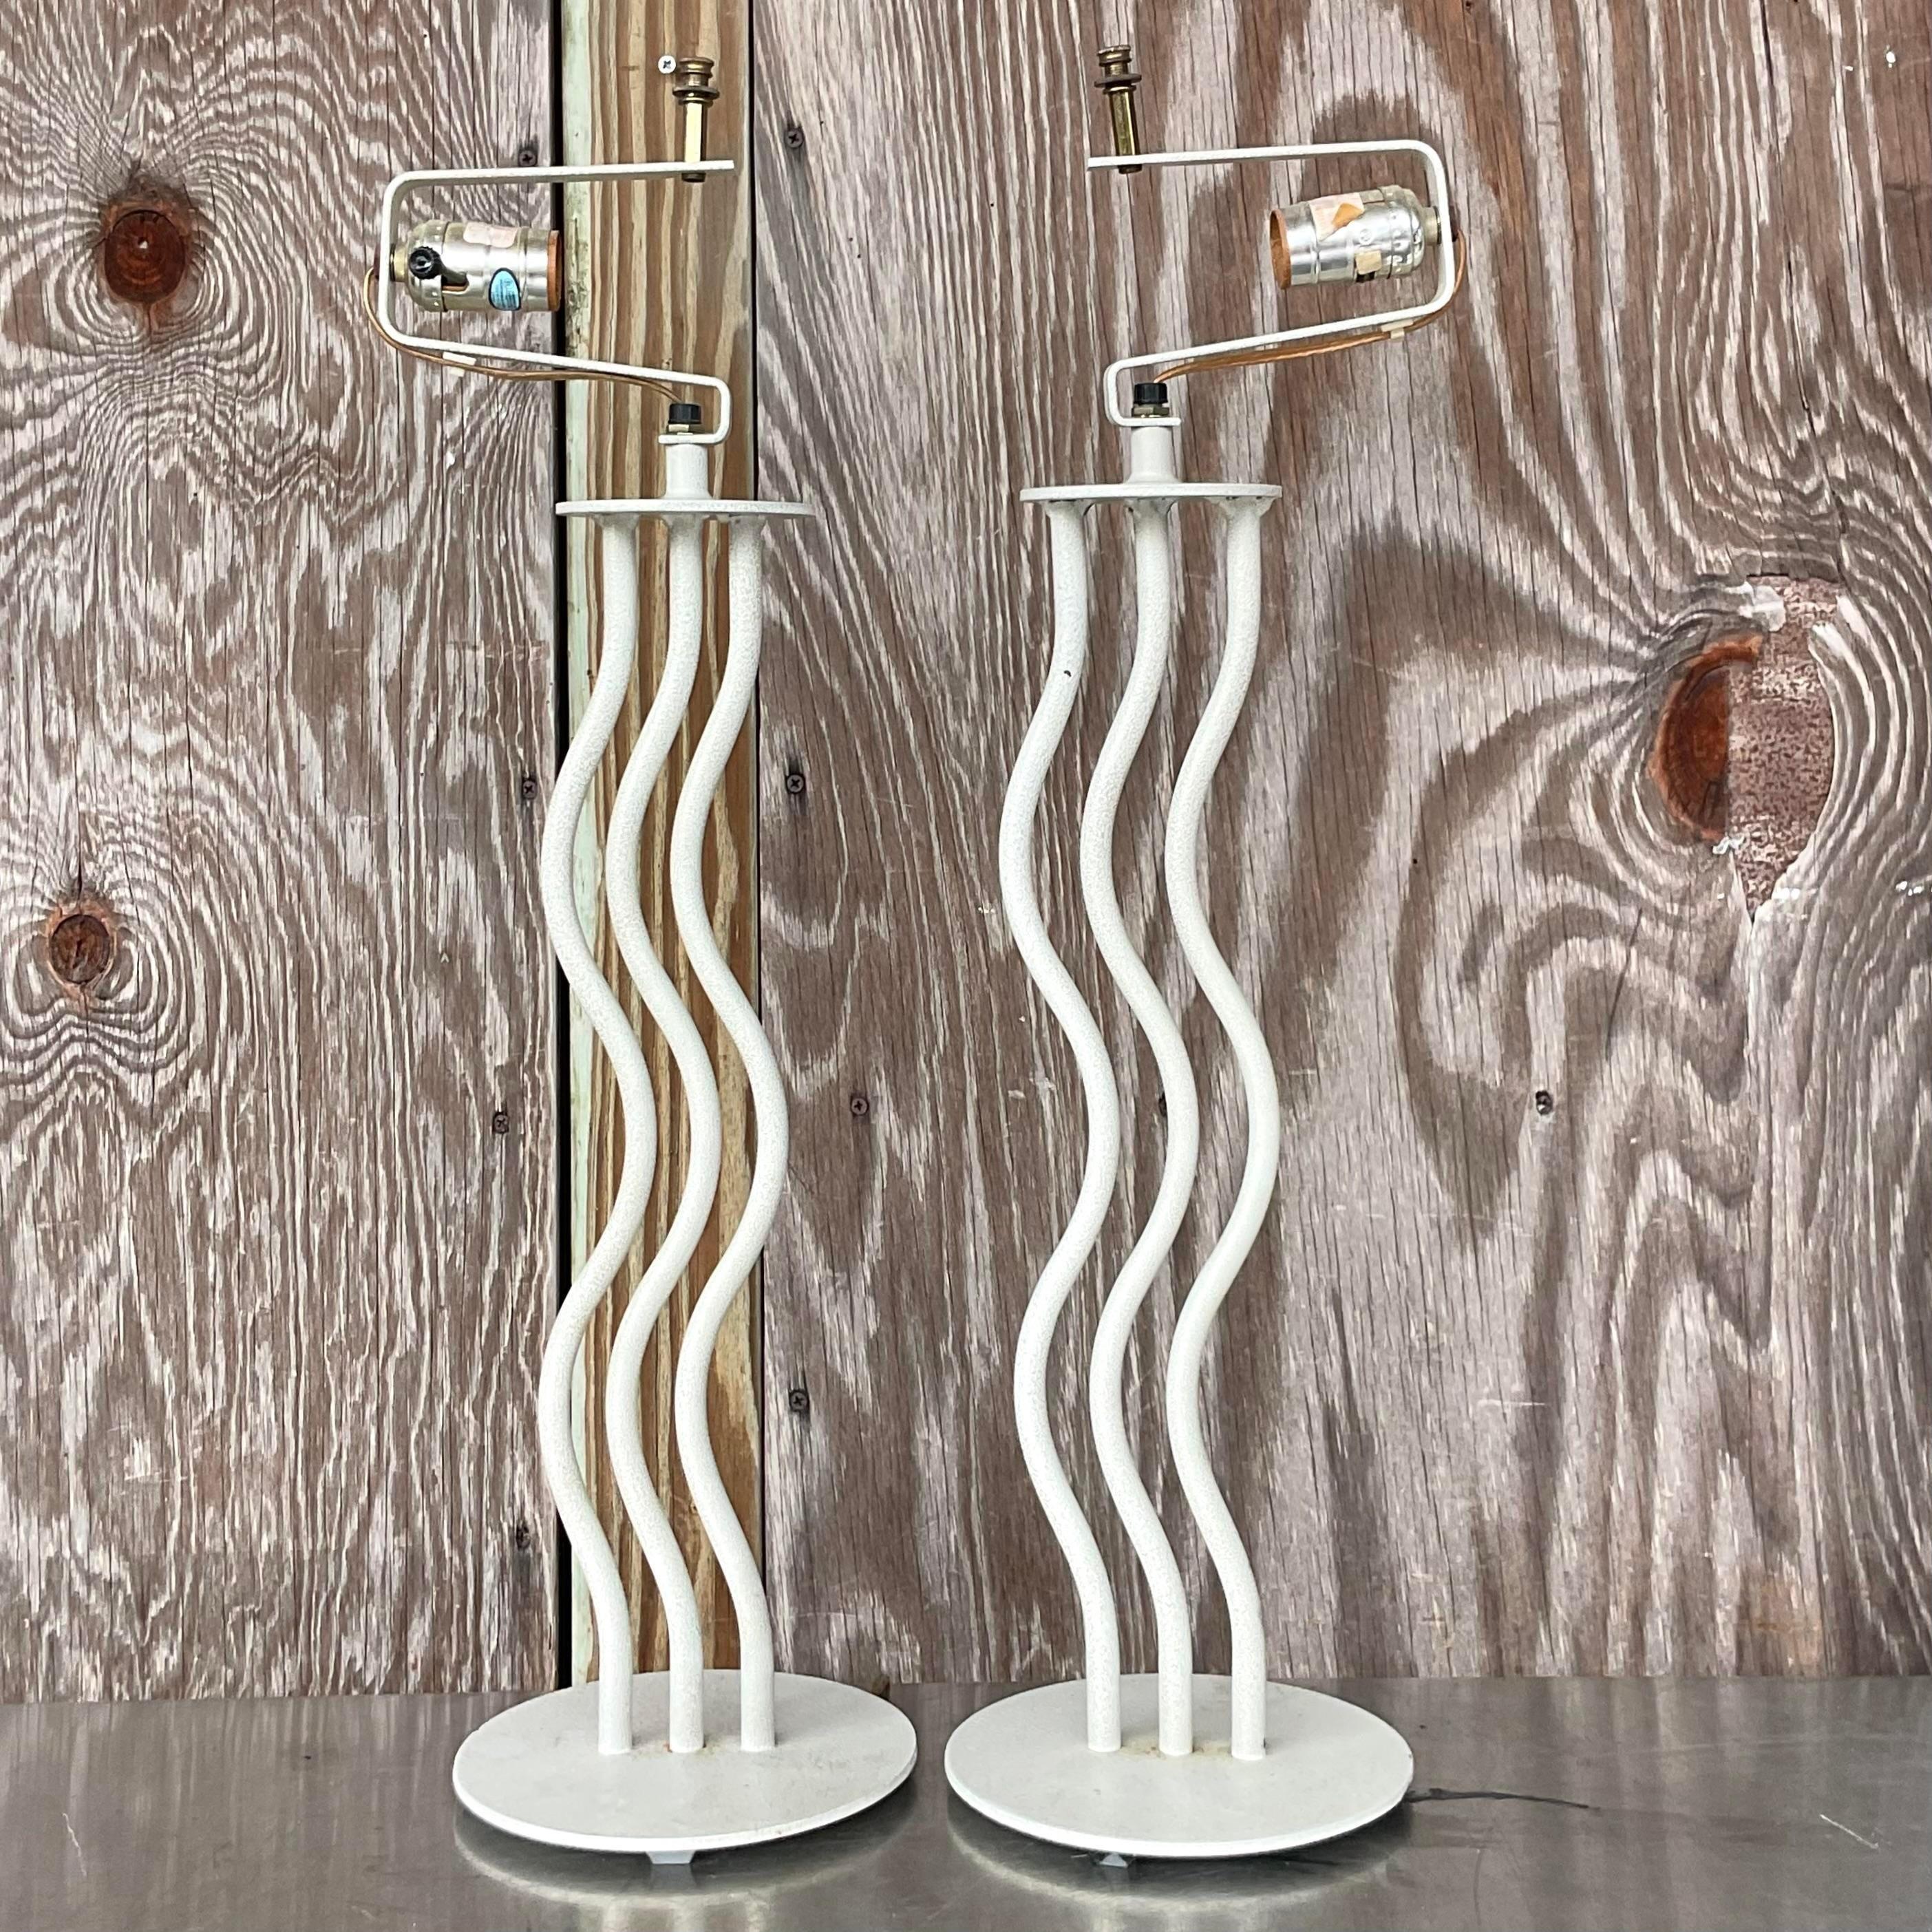 A fabulous pair of vintage Postmodern table lamps. The iconic wave design in a painted metal. Acquired from a Palm Beach estate.